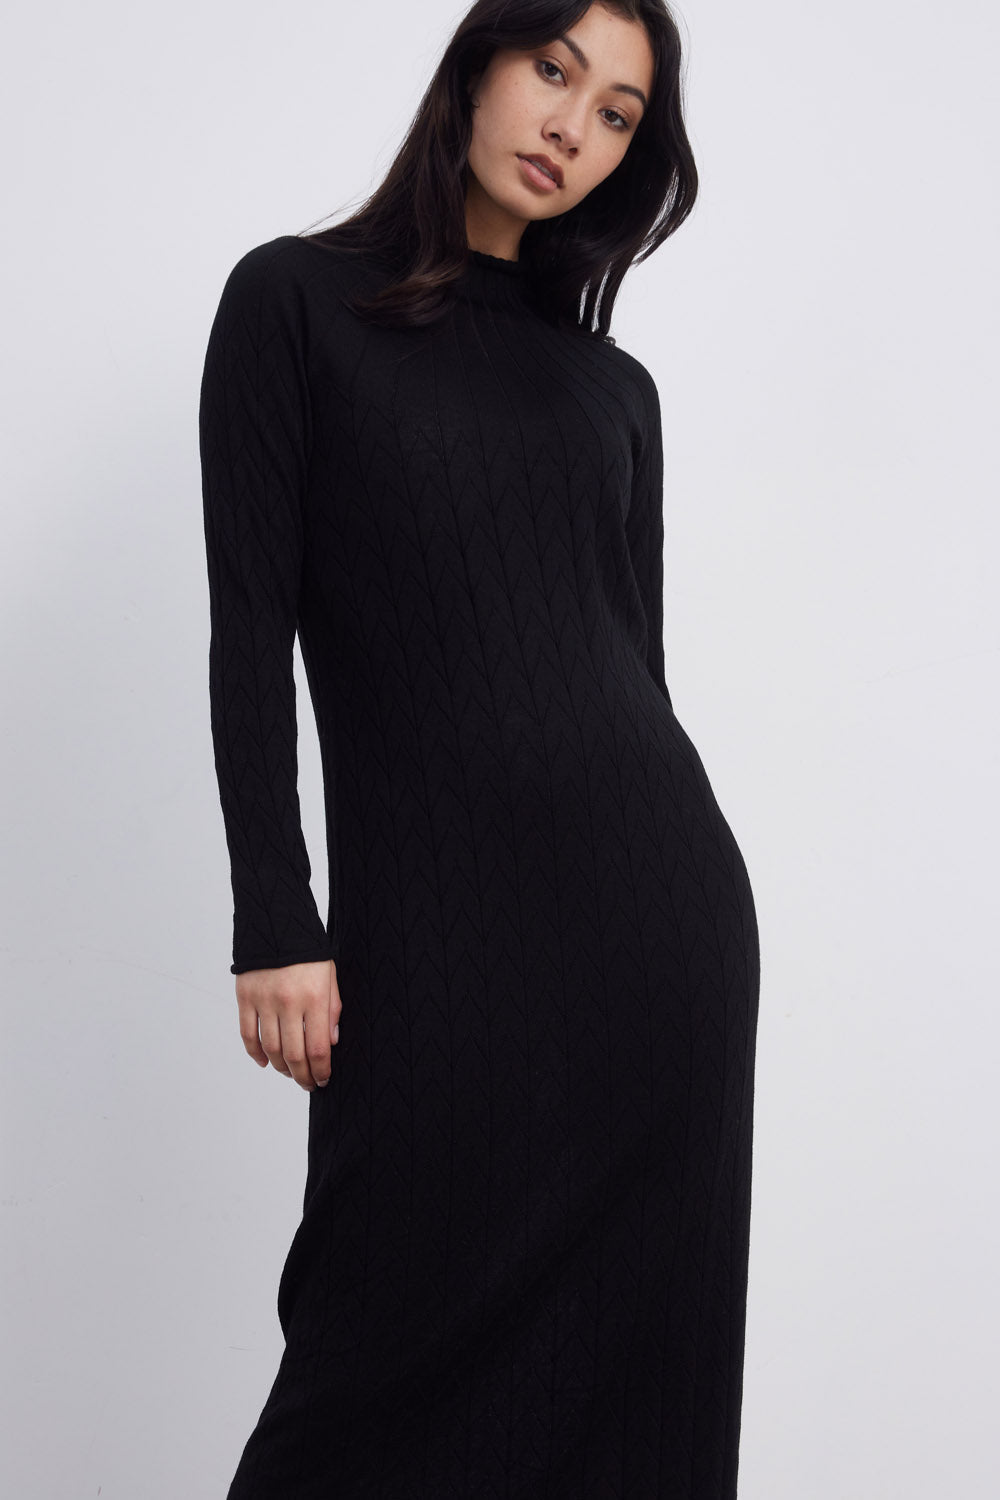 Standard Issue Pavilion Dress | Black | Robe Boutique | Free NZ Shipping